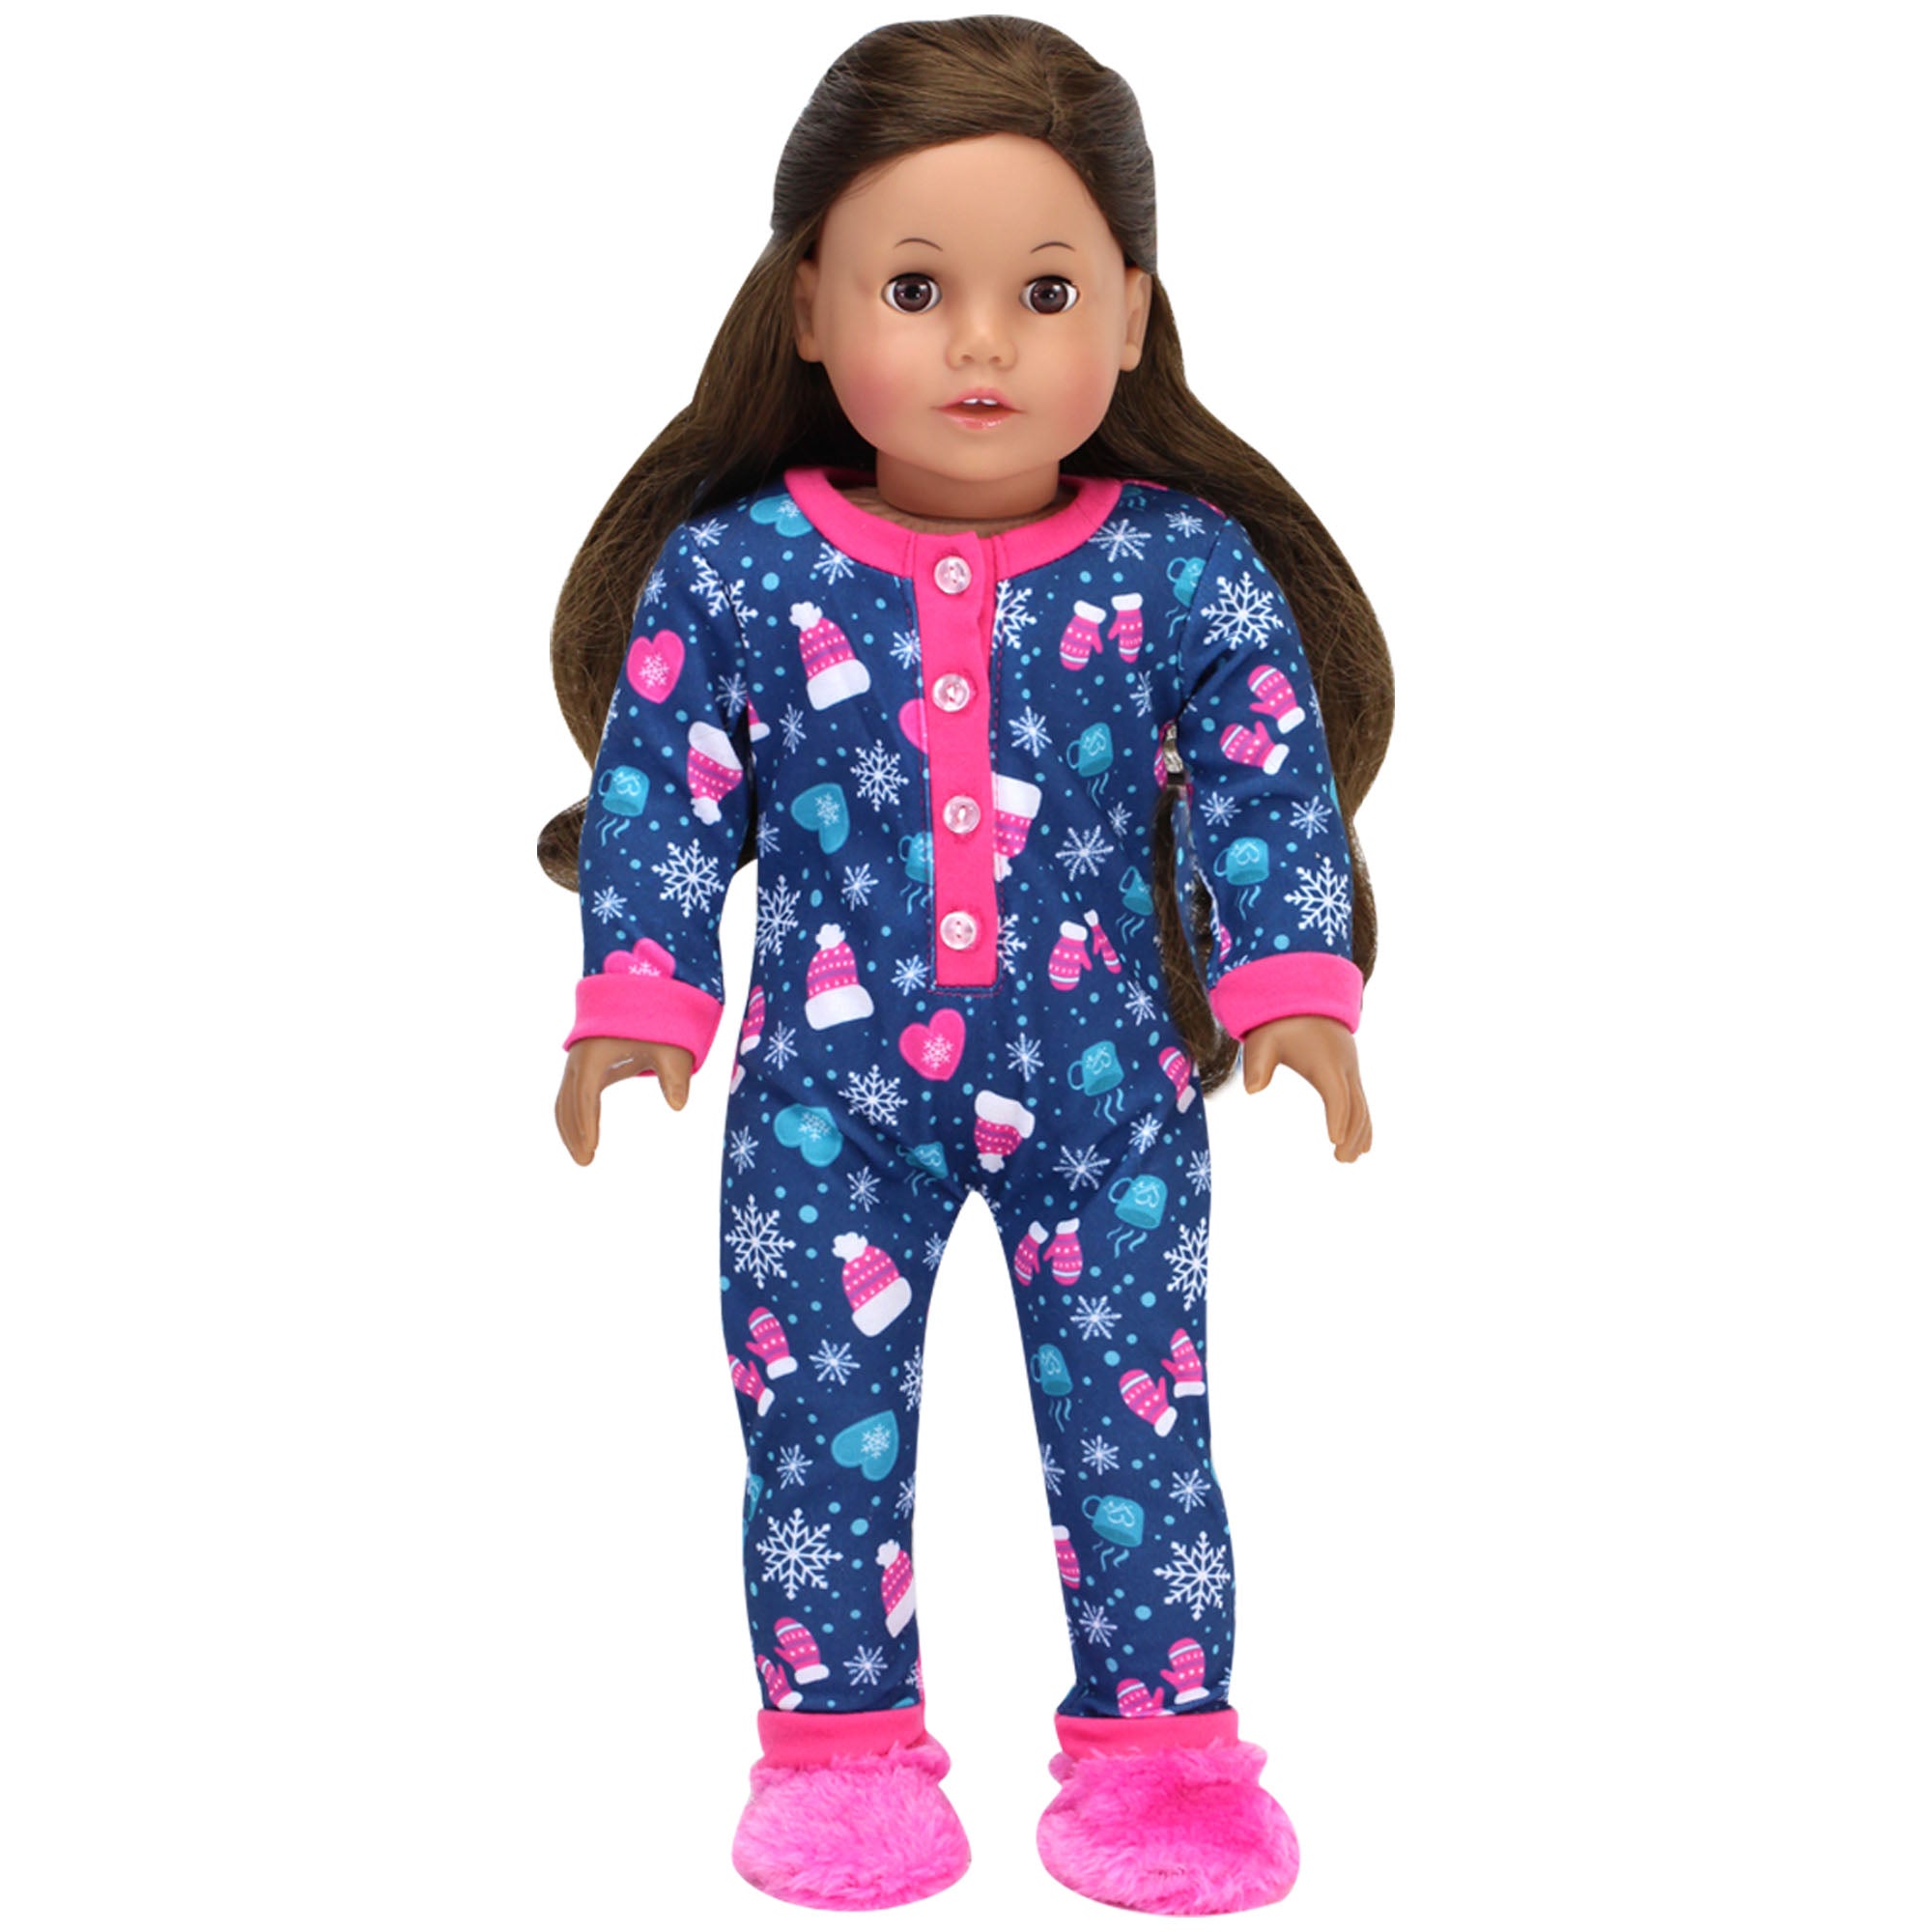 Sophia’s Hot Cocoa Print Long-Sleeved Winter Pajama Onesie with Matching Fuzzy Slippers Sleep Set for 18” Dolls, Navy/Hot Pink